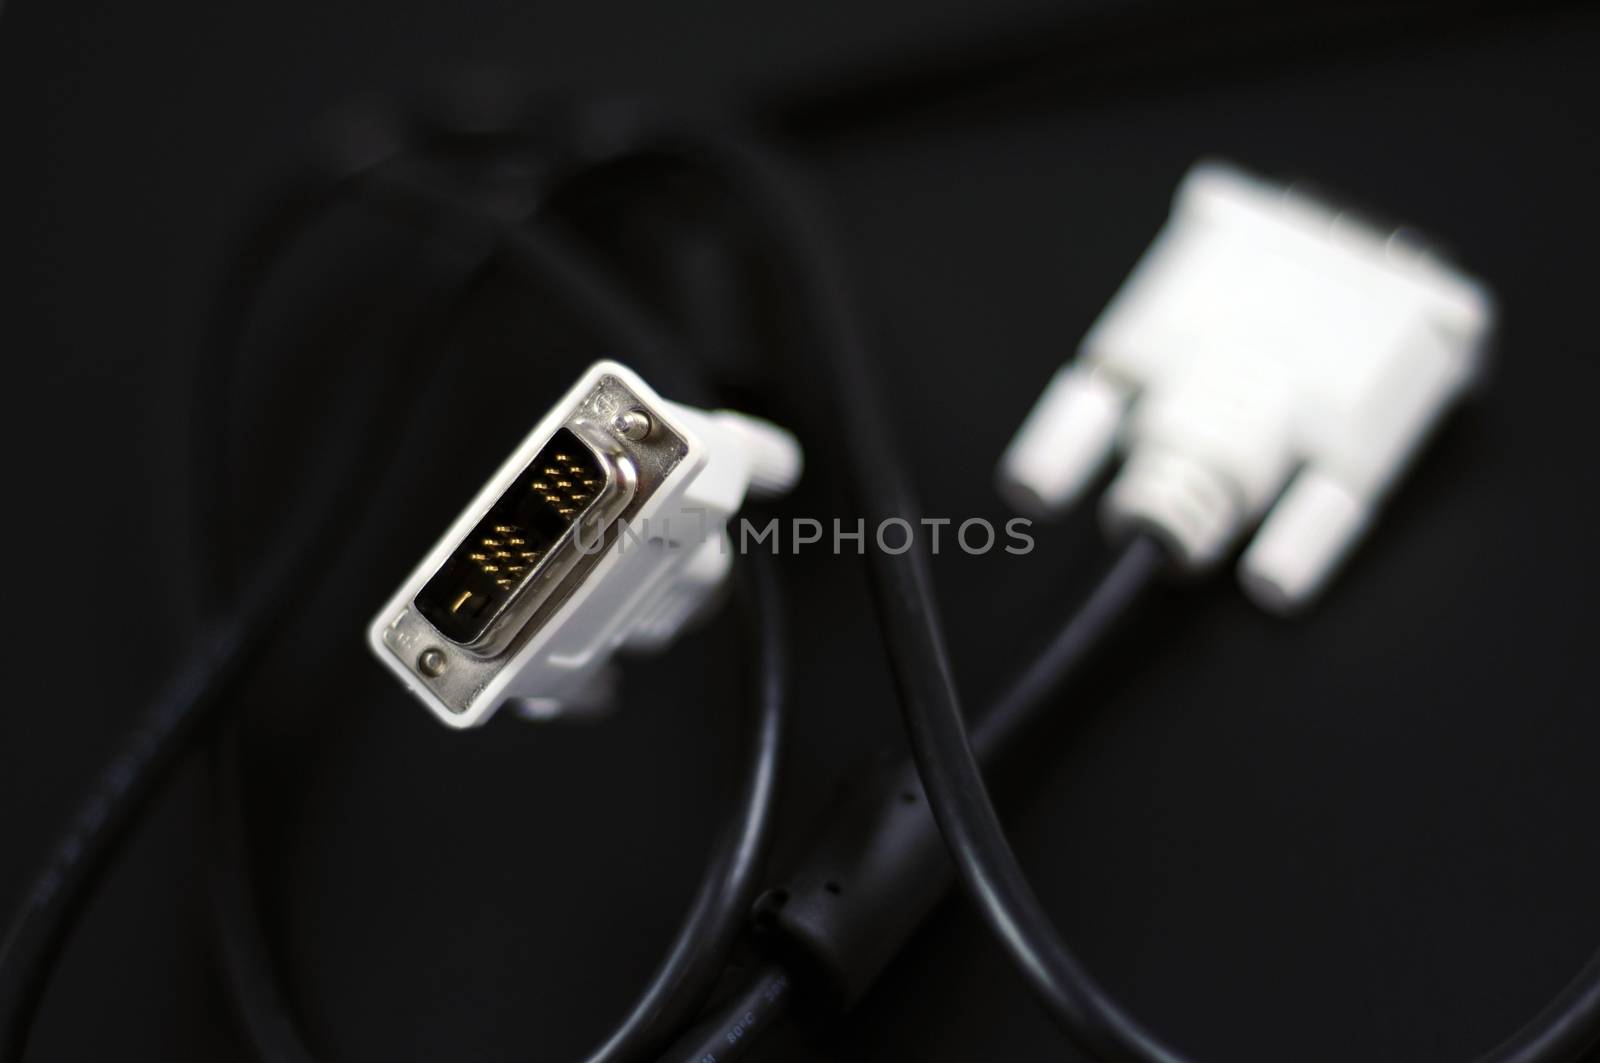 White DVI-D Dual Link Digital Monitor Cable on Solid Black Background. Technology Photo Collection.